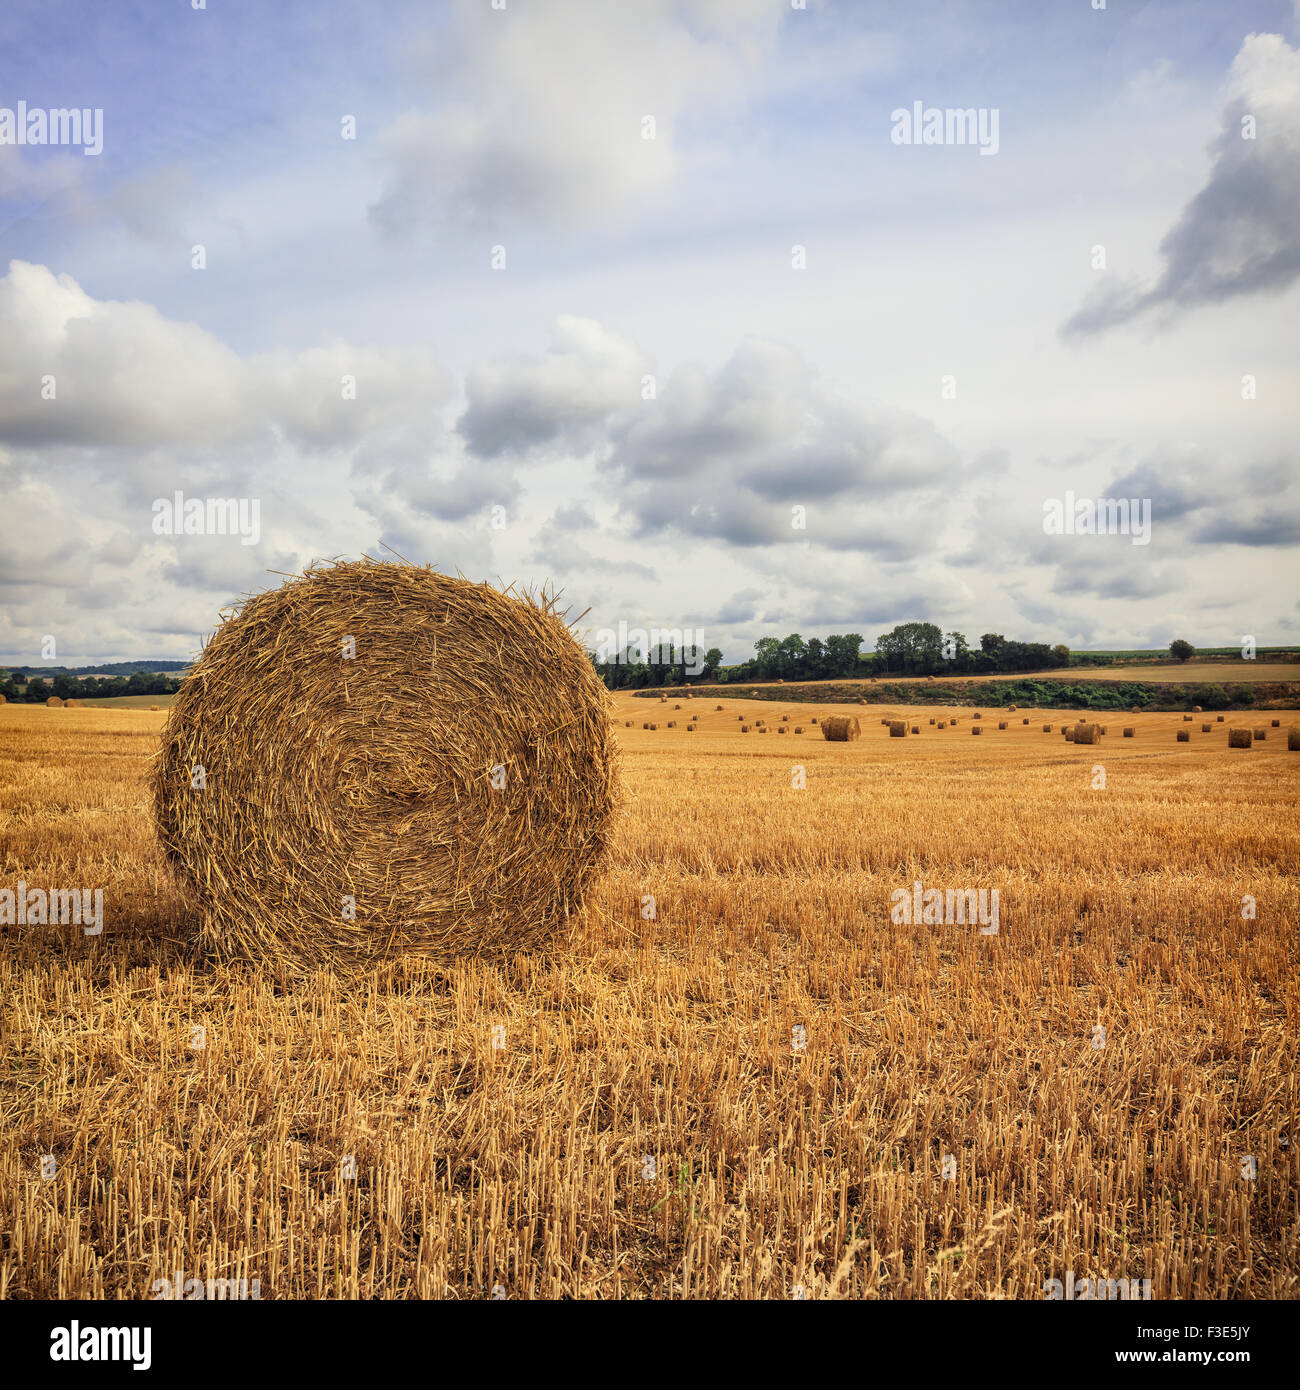 Haystack in the field Stock Photo